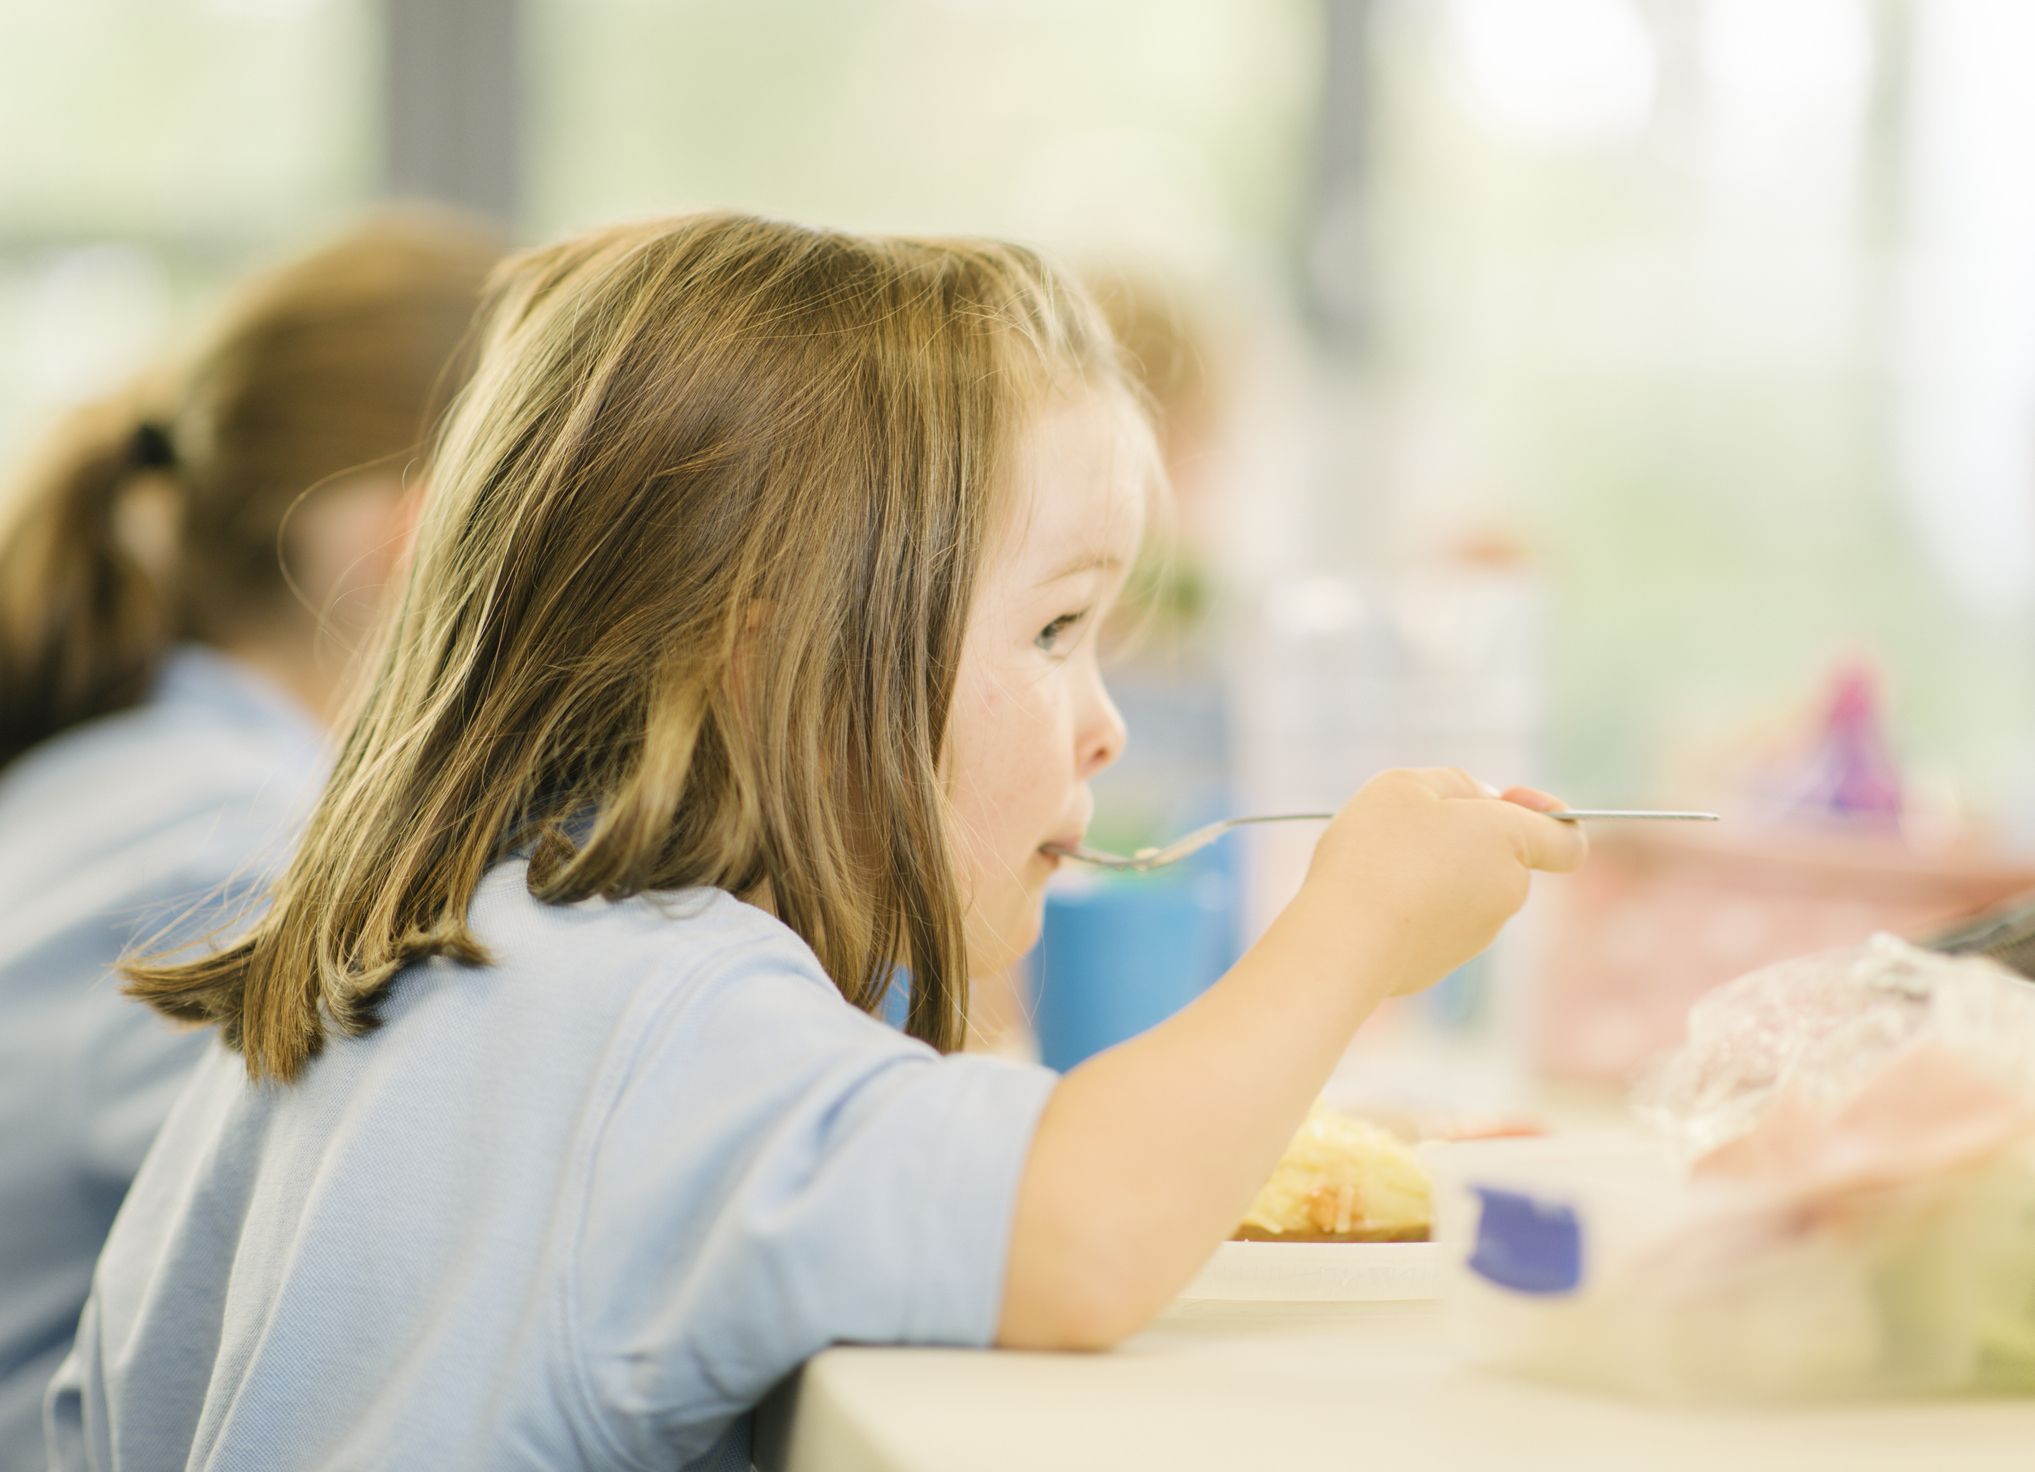 Were school dinners a delight or a dread?